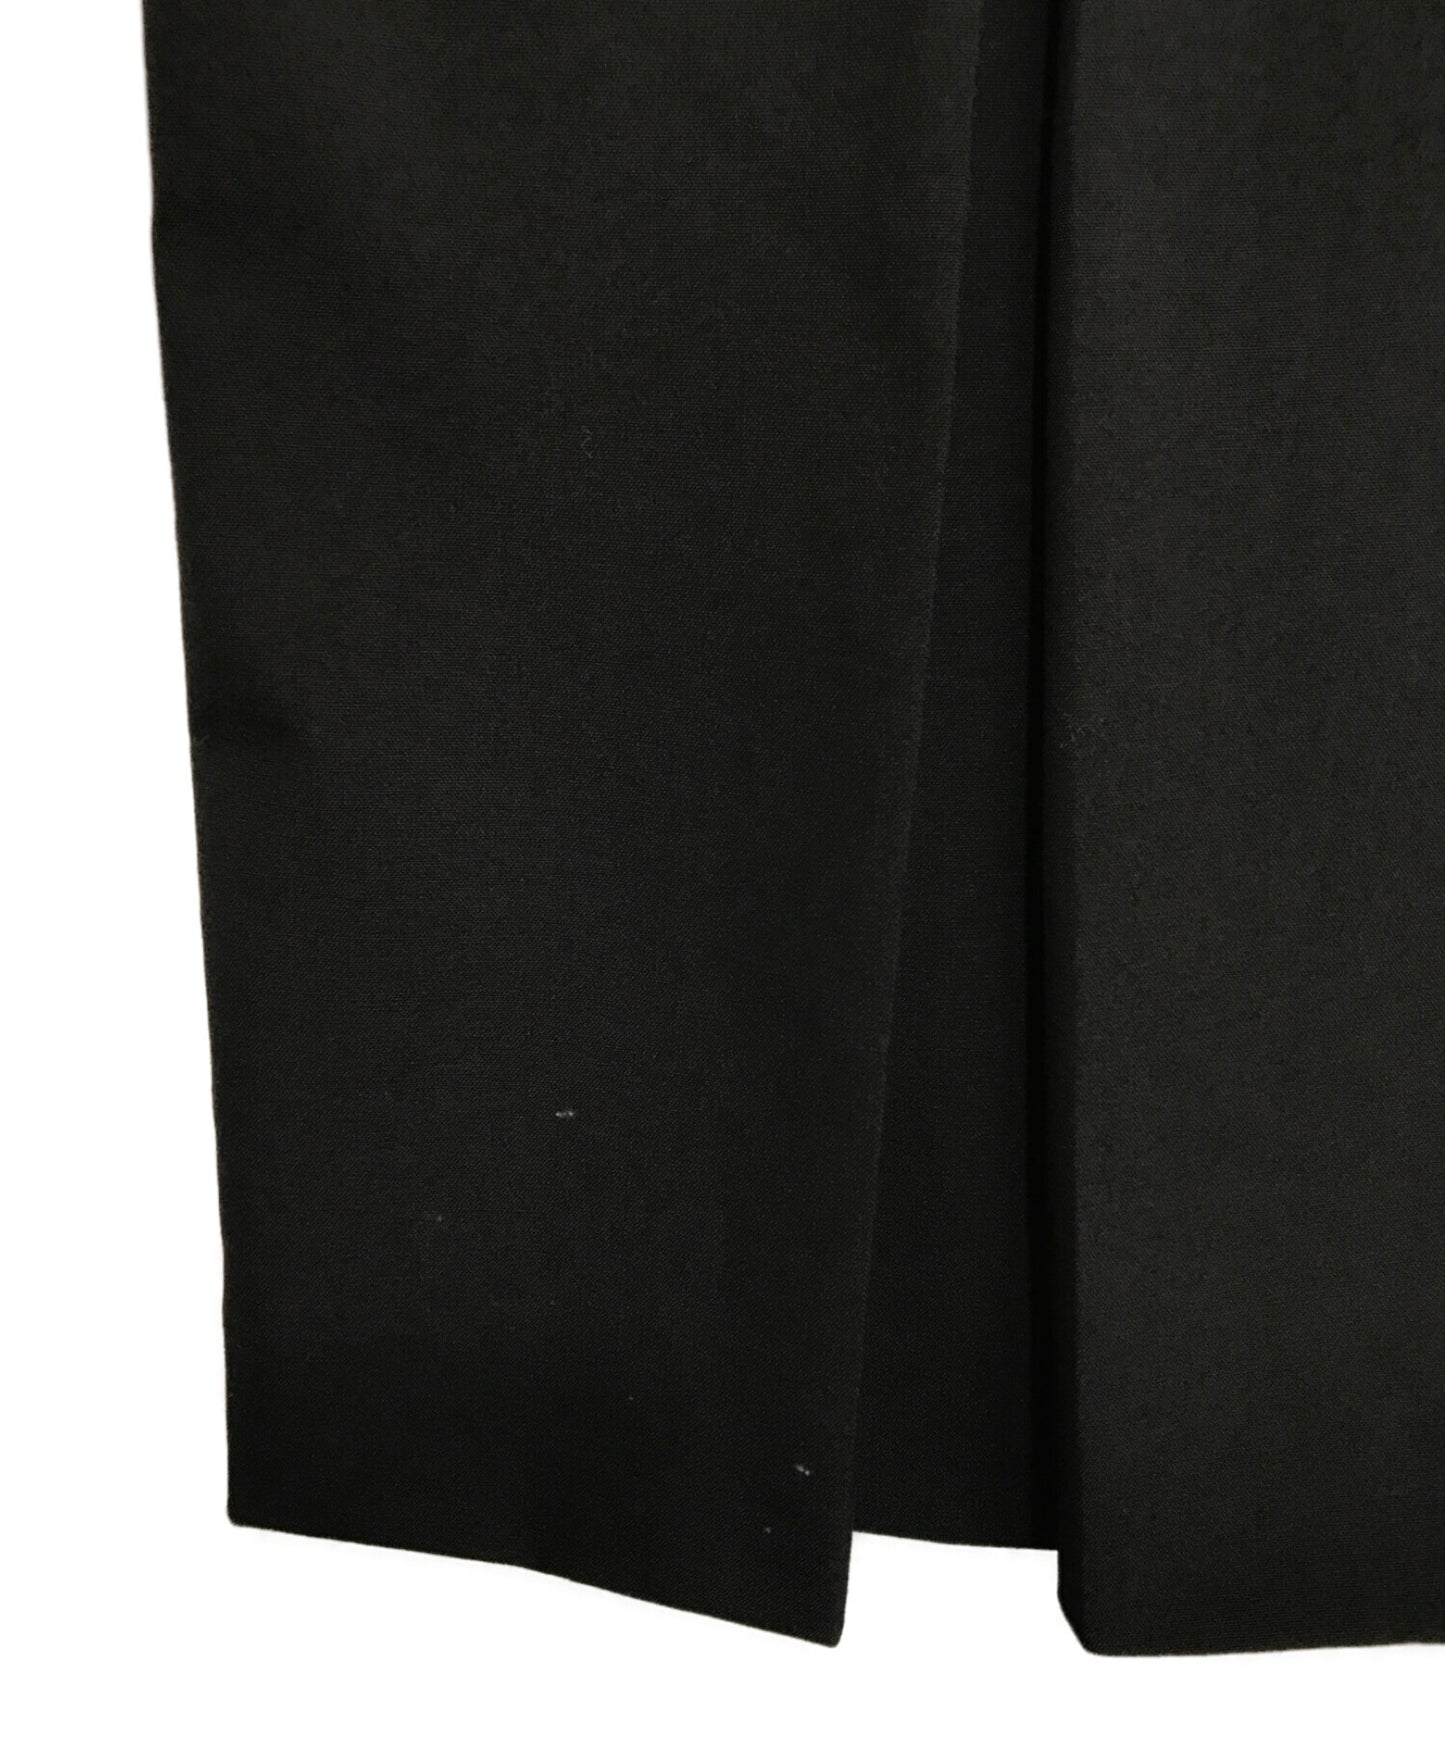 [Pre-owned] COMME des GARCONS HOMME PLUS tailored skirt PG-A003